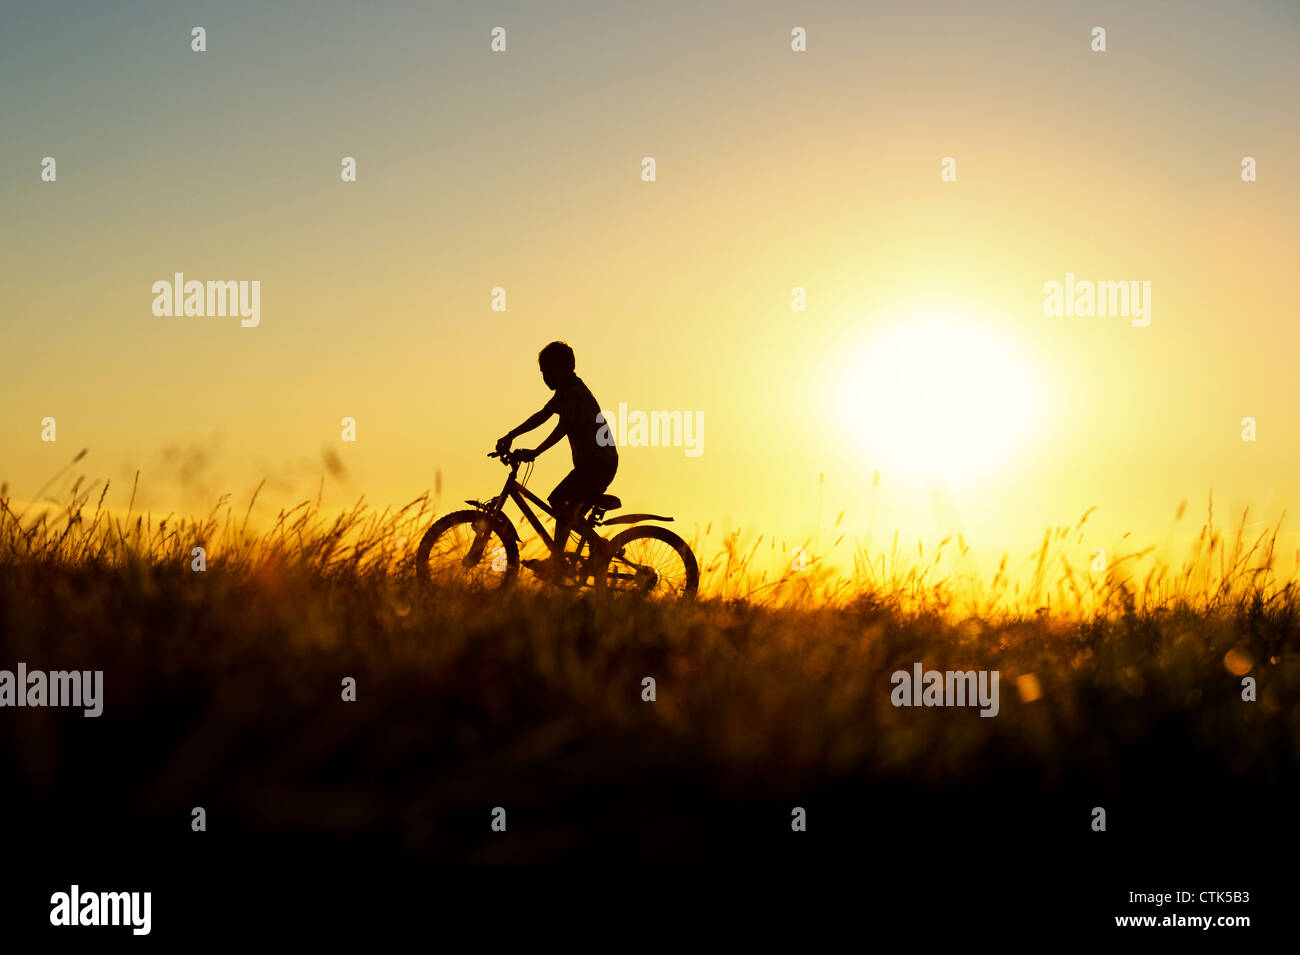 Boy riding a bicycle through grass at sunset. Silhouette. UK Stock Photo